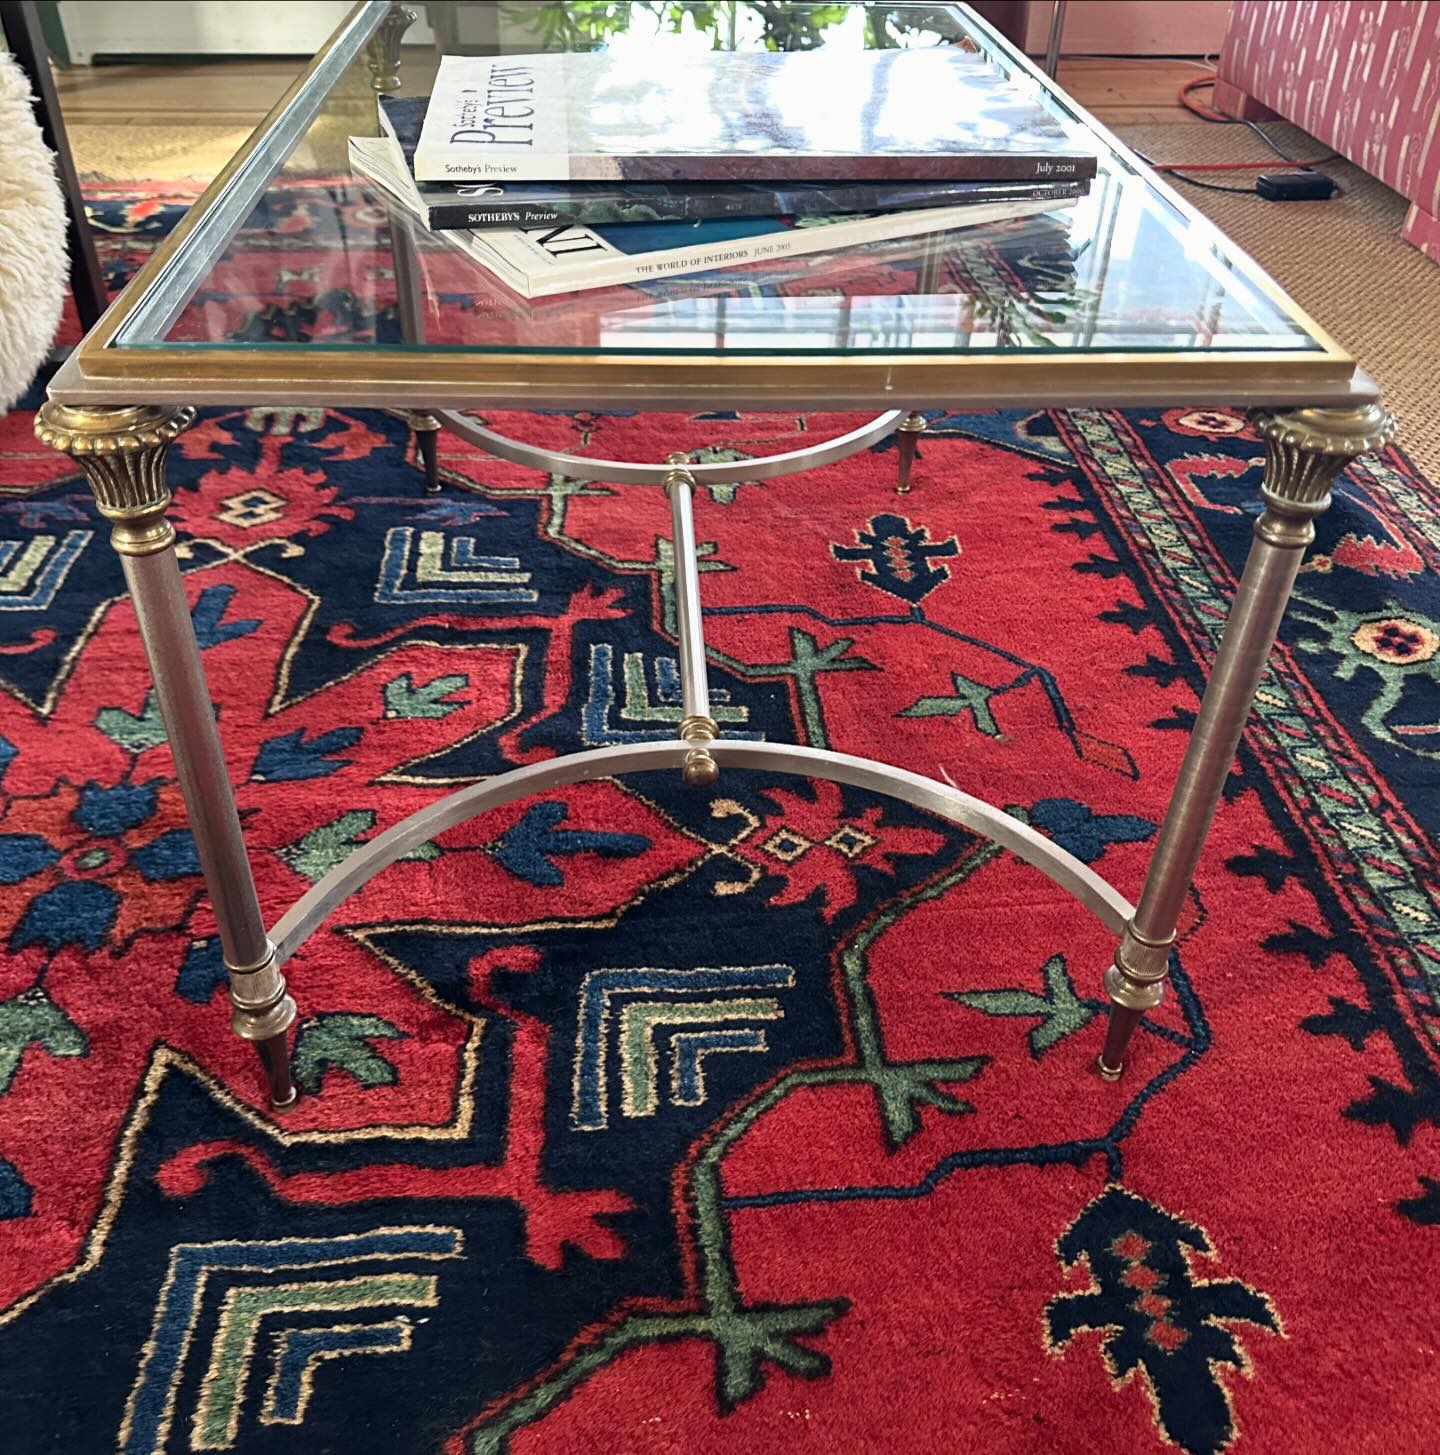 Excellent vintage Regency glass top coffee table, brass and steel frame is heavy and high quality